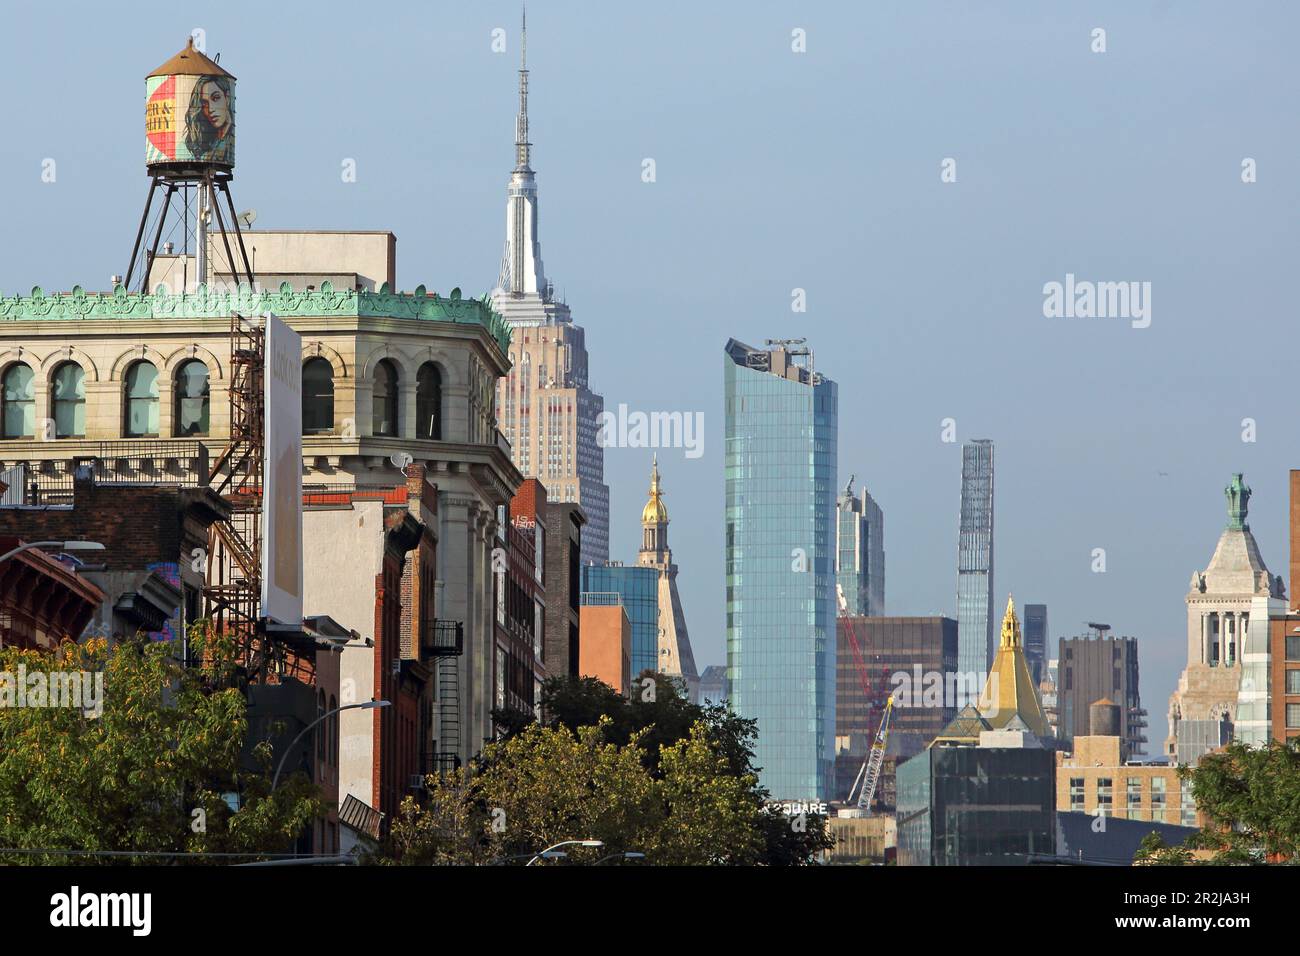 View of the Midtown Manhattan skyline with the Empire State Building from Bowery Street, Manhattan, New York, New York, USA Stock Photo